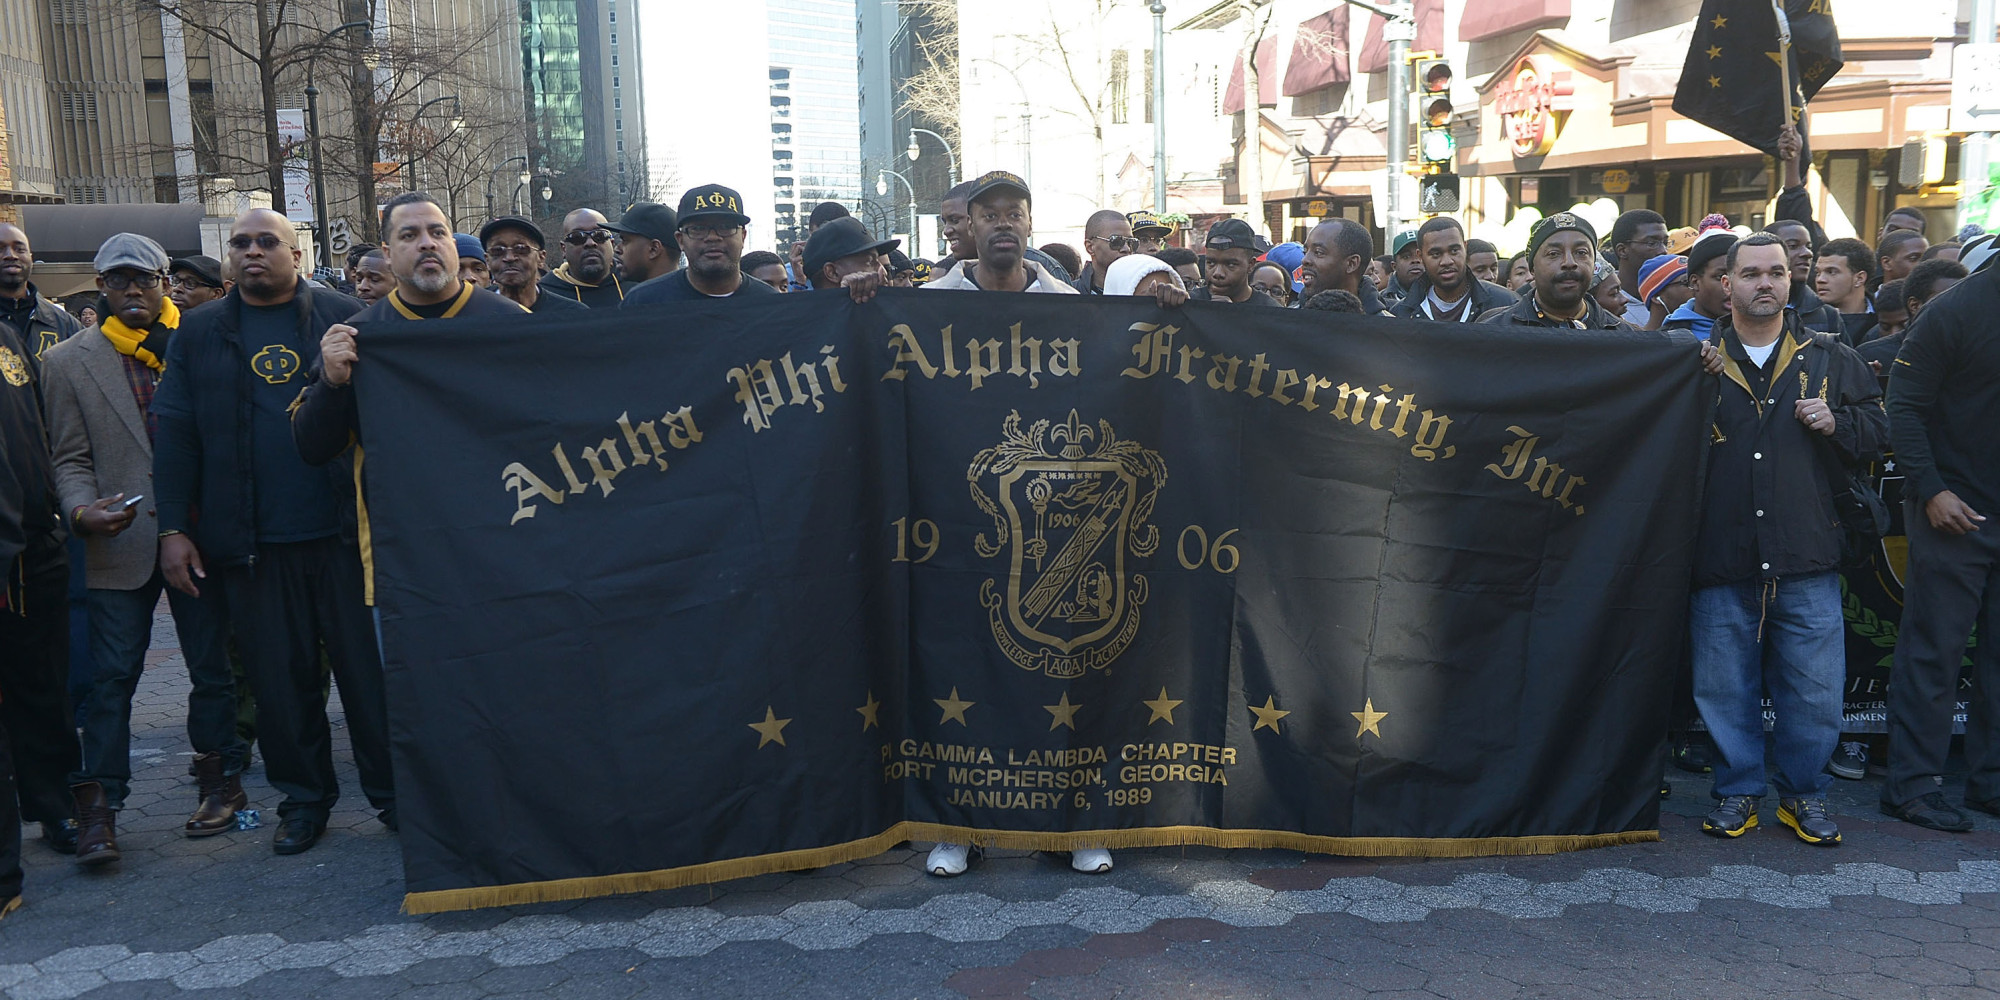 African American Fraternities and Sororities: Our Fight Has Just Begun | Gregory S. Parks2000 x 1000